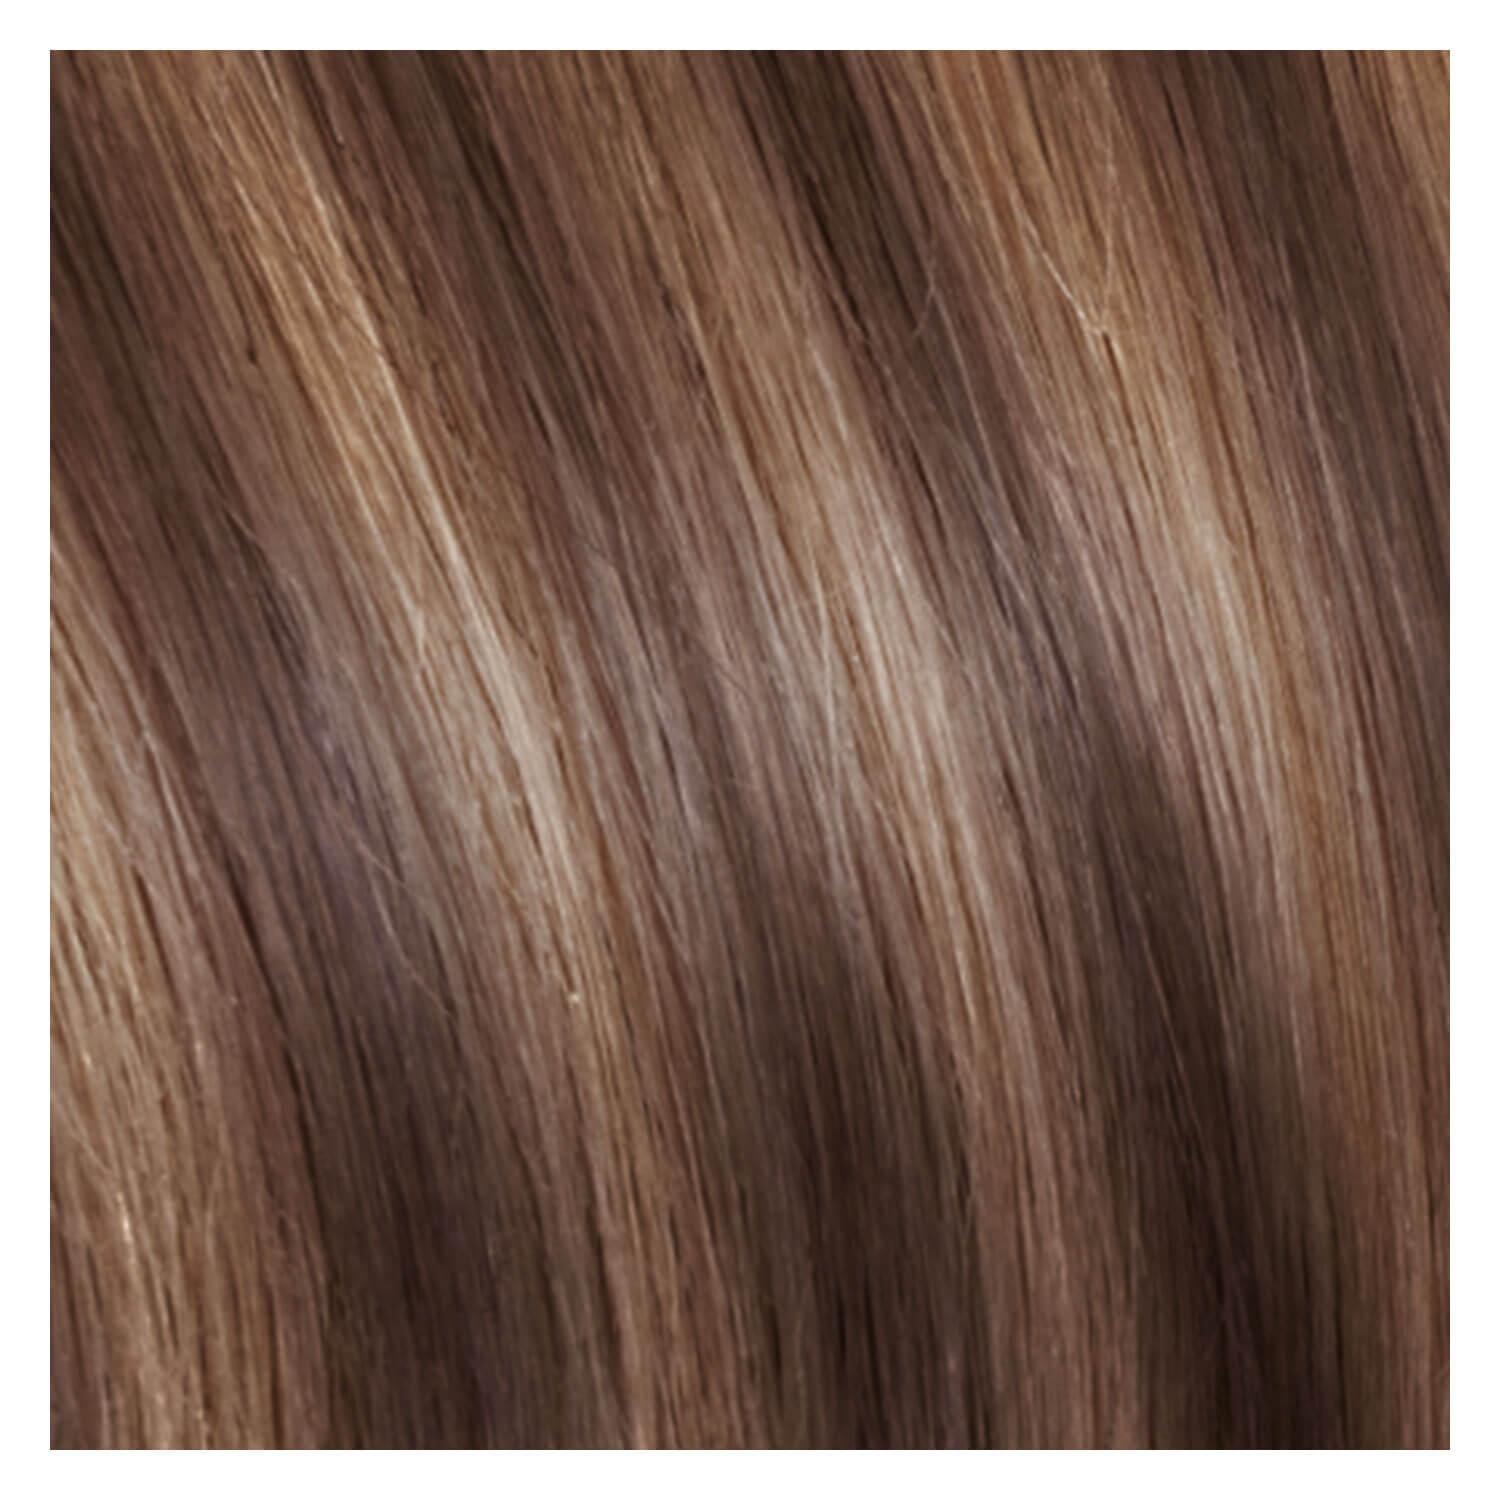 SHE Tape In-System Hair Extensions Straight - M6/27 Helles Kastanienbraun/Mittleres Goldblond 55/60c